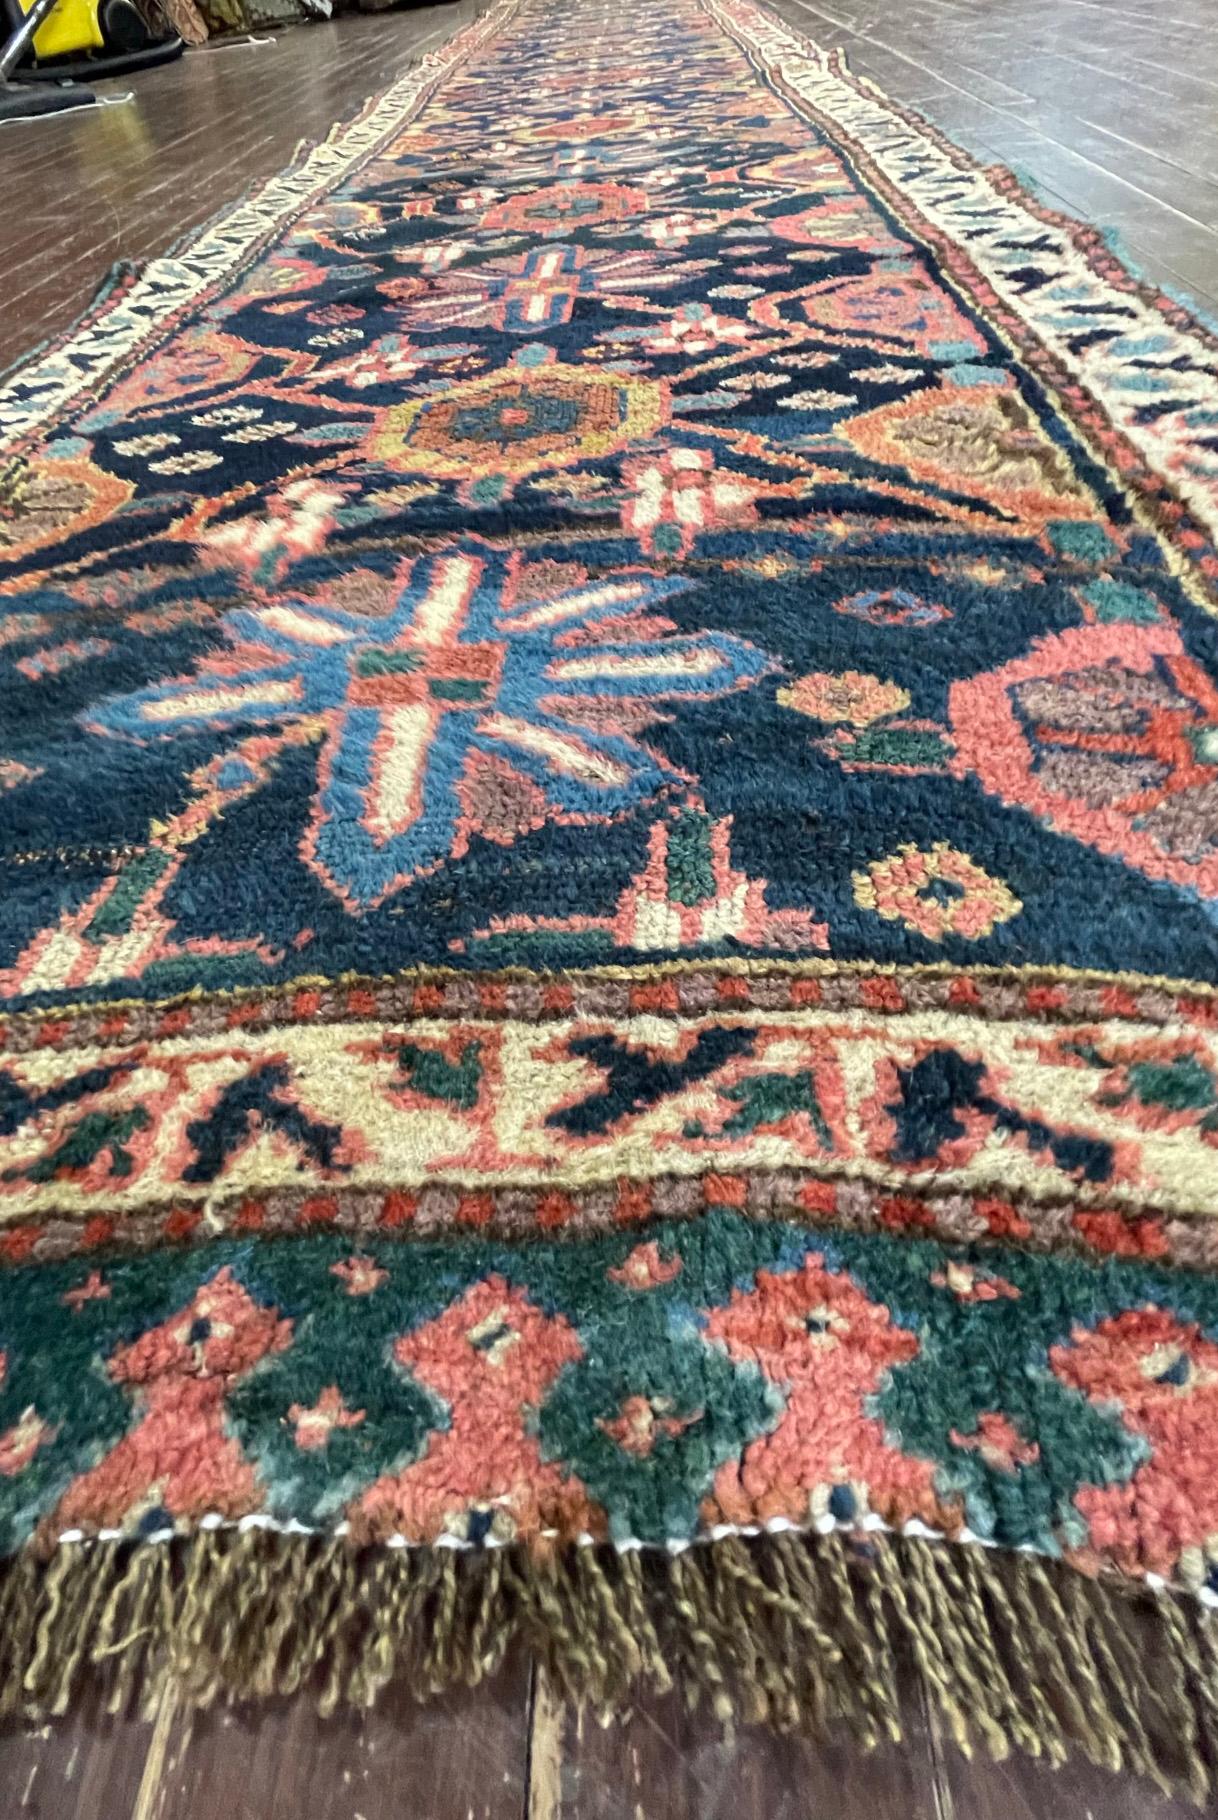 Absolutely gorgeous antique Persian Kurdish Bijar Halvayi runner gallery carpet with wool foundation and beautiful Geometric pattern and Abrash with vegetable dyes in red gold and blue in good condition condition, circa 1900s.
Bidjar is the name of